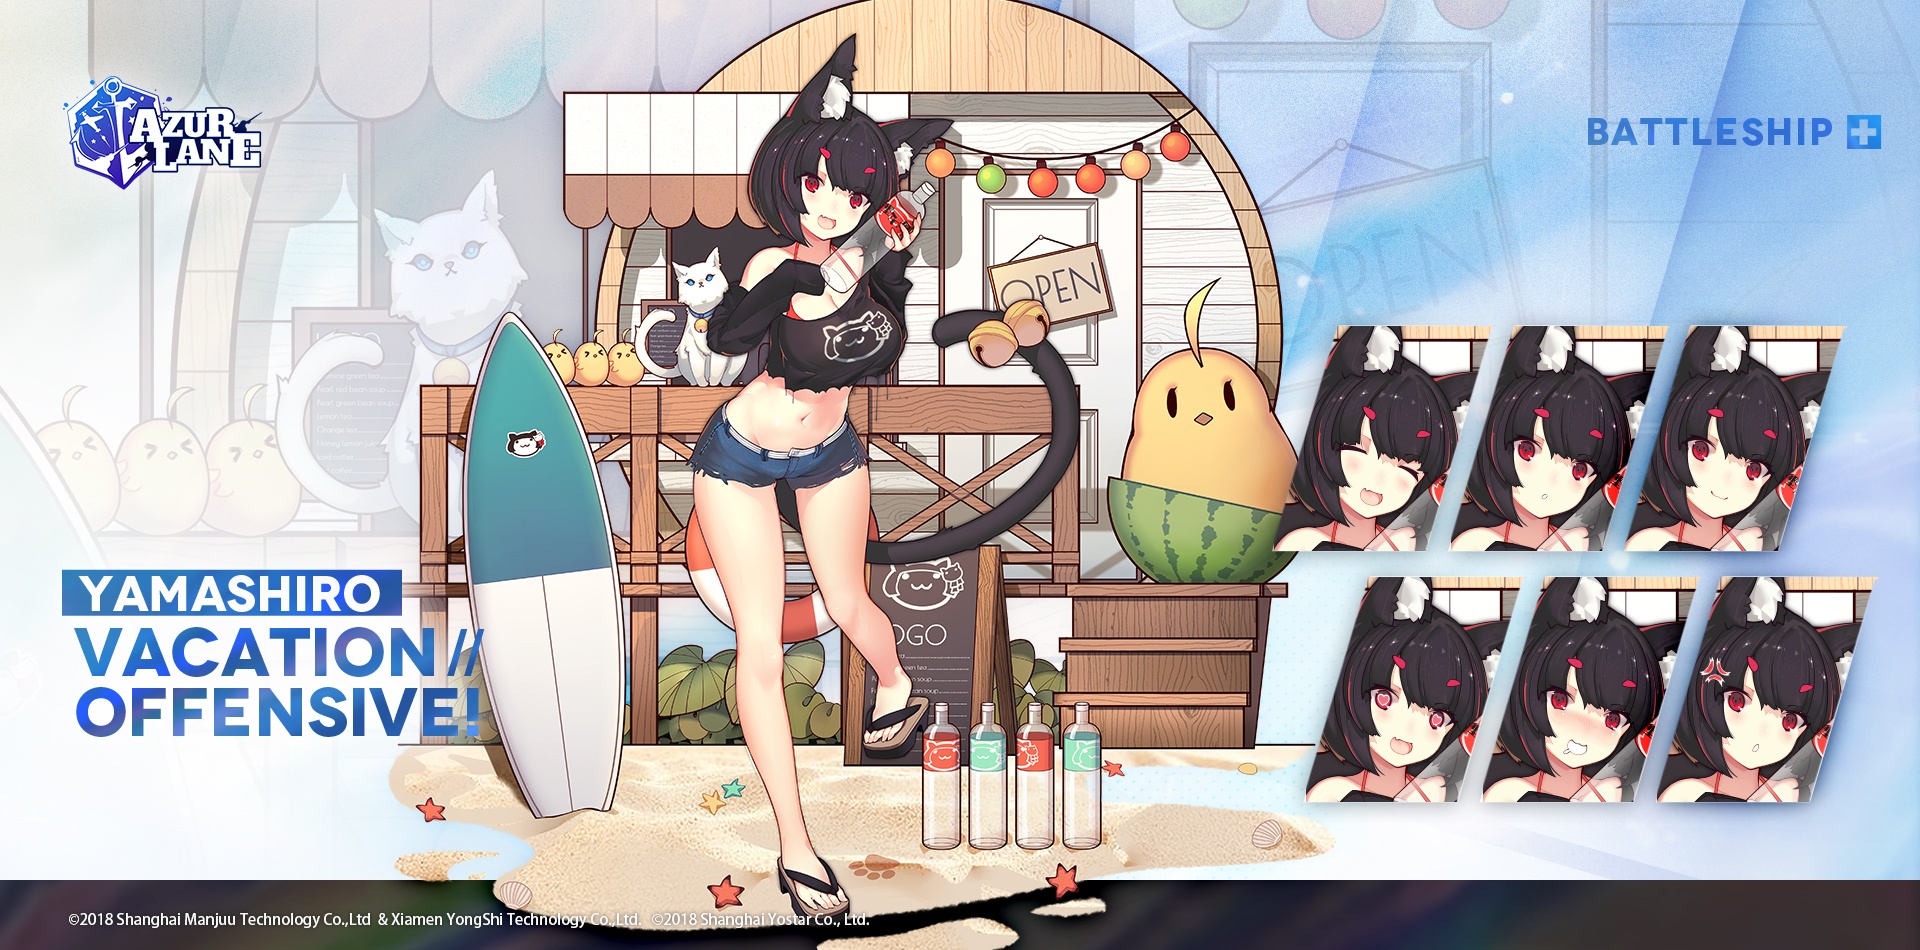 Azur Lane: June Update - Vacation Offensive, Blueprint Completion Plan - Izumo, and more